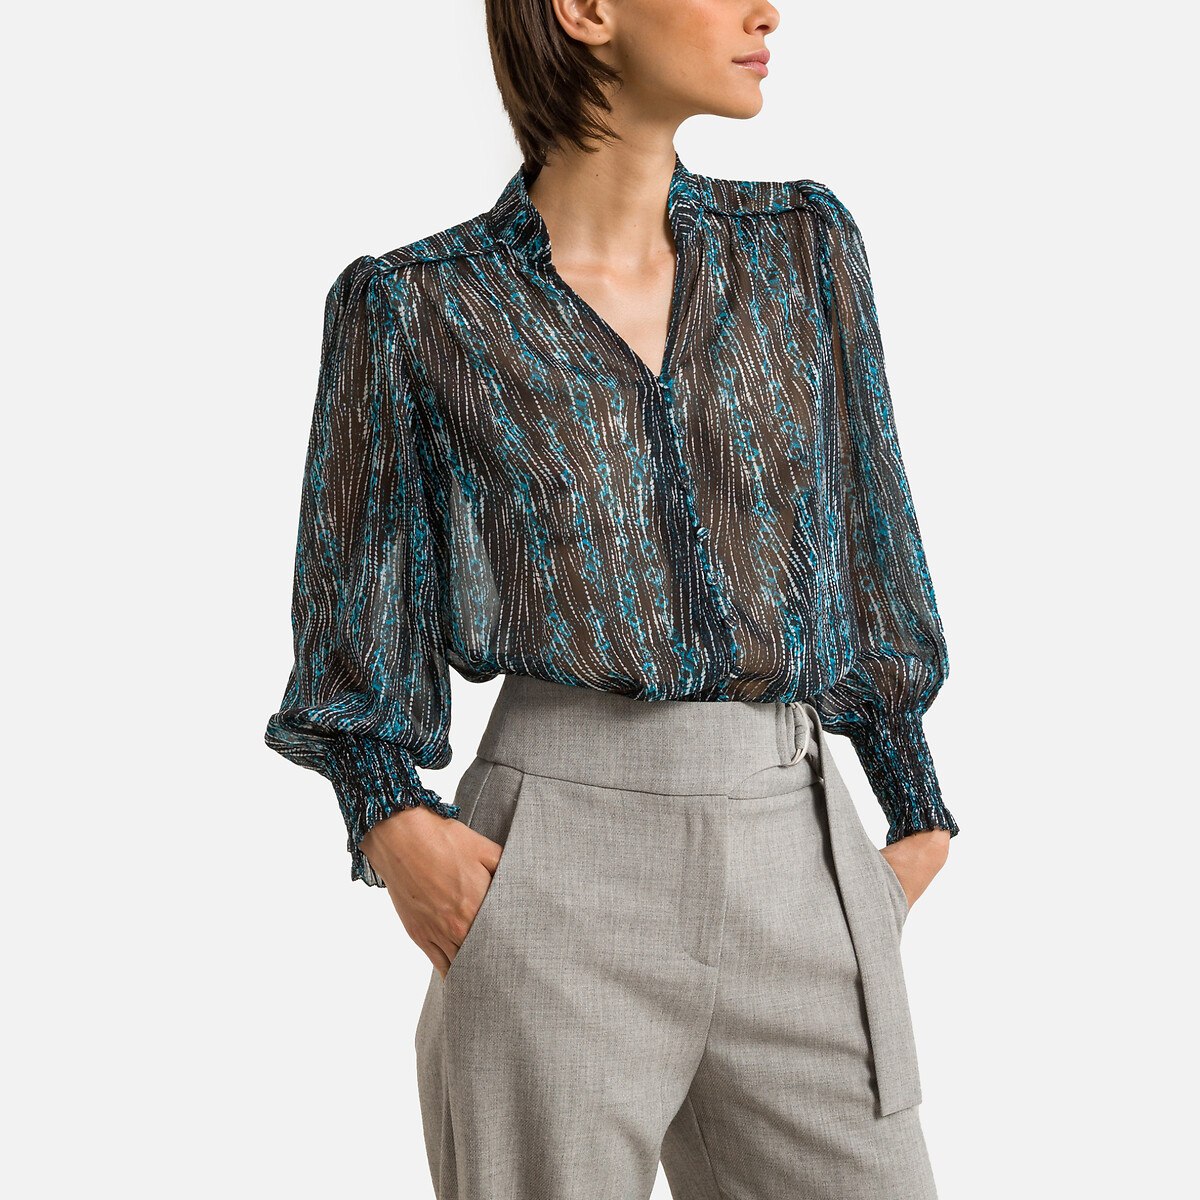 Leyla Recycled Patterned Blouse with Long Sleeves